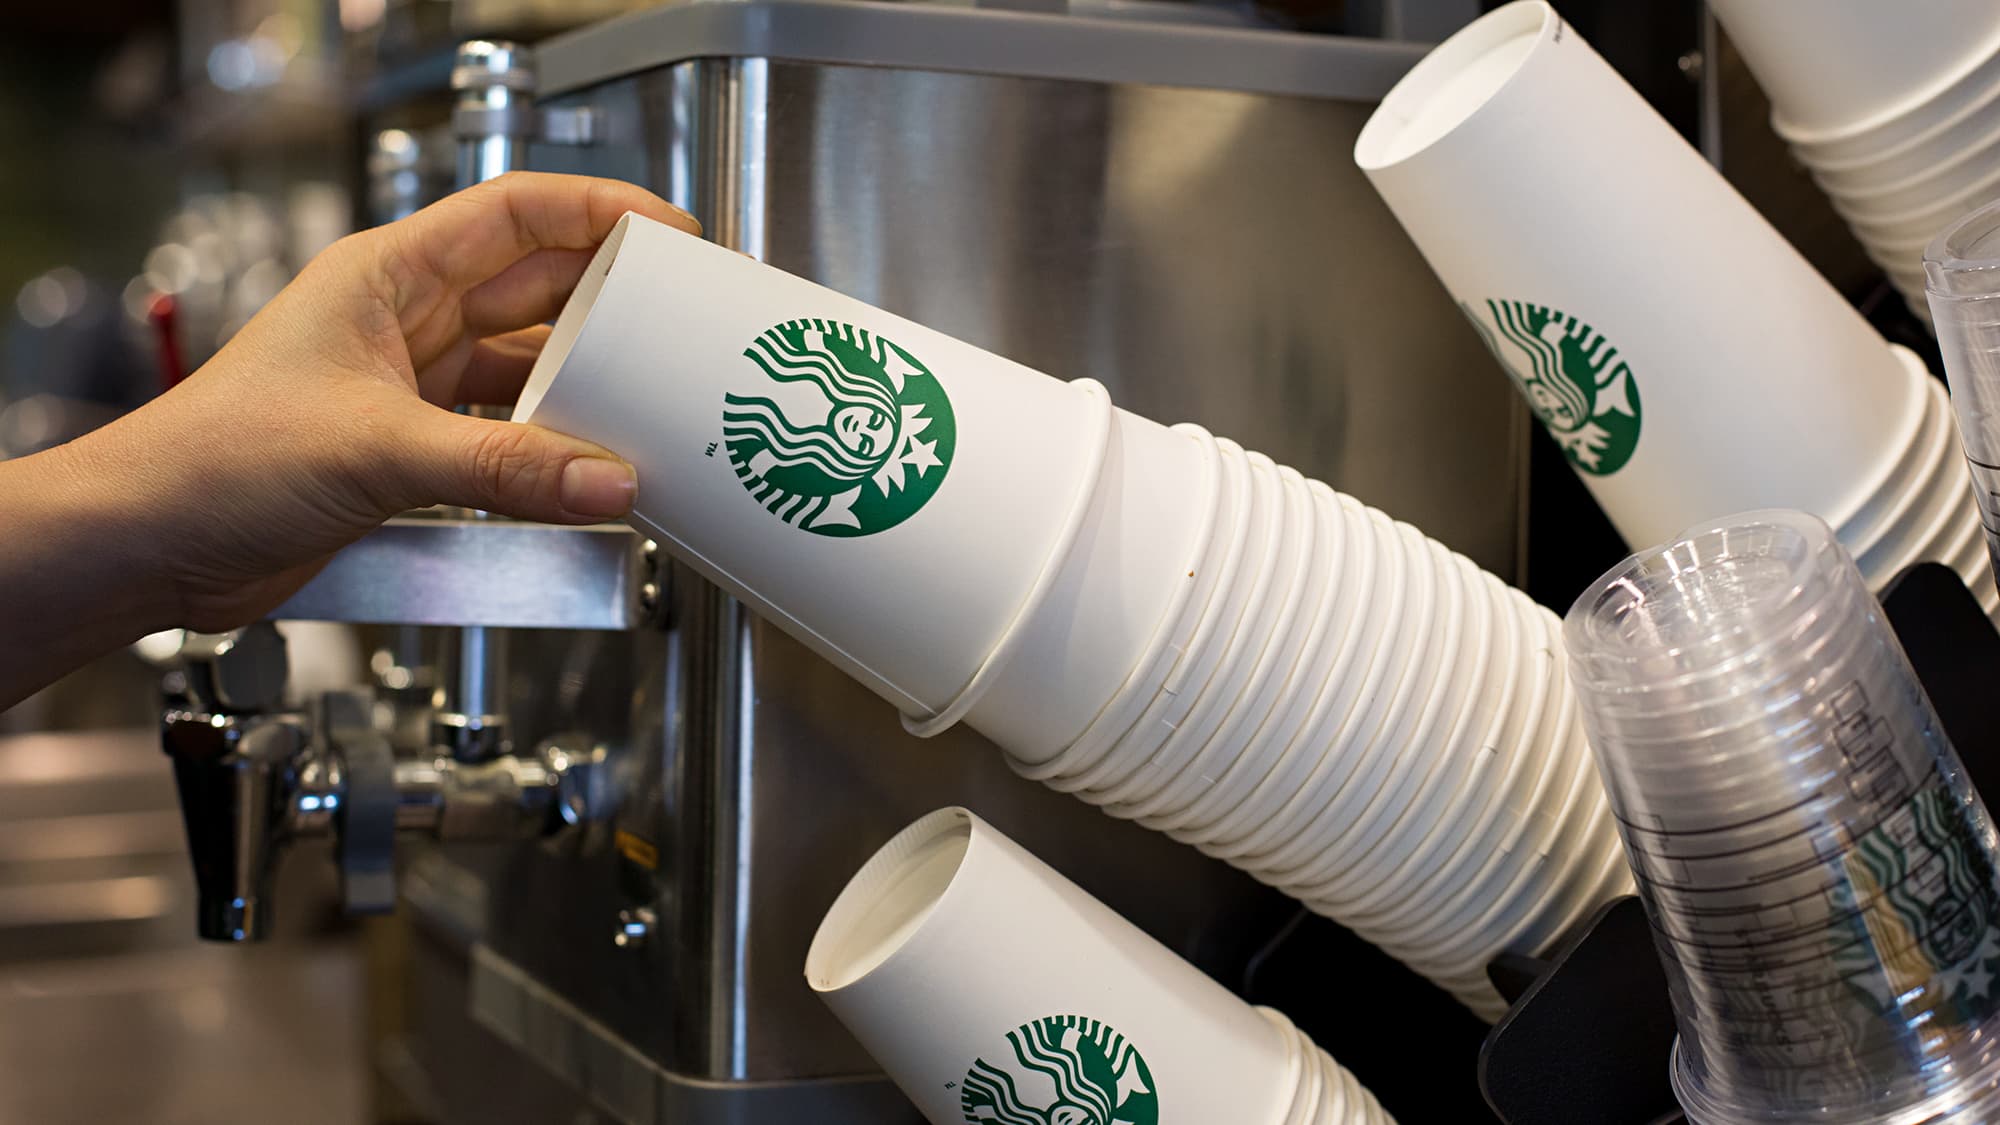 Starbucks revives reusable cup use after pandemic pause